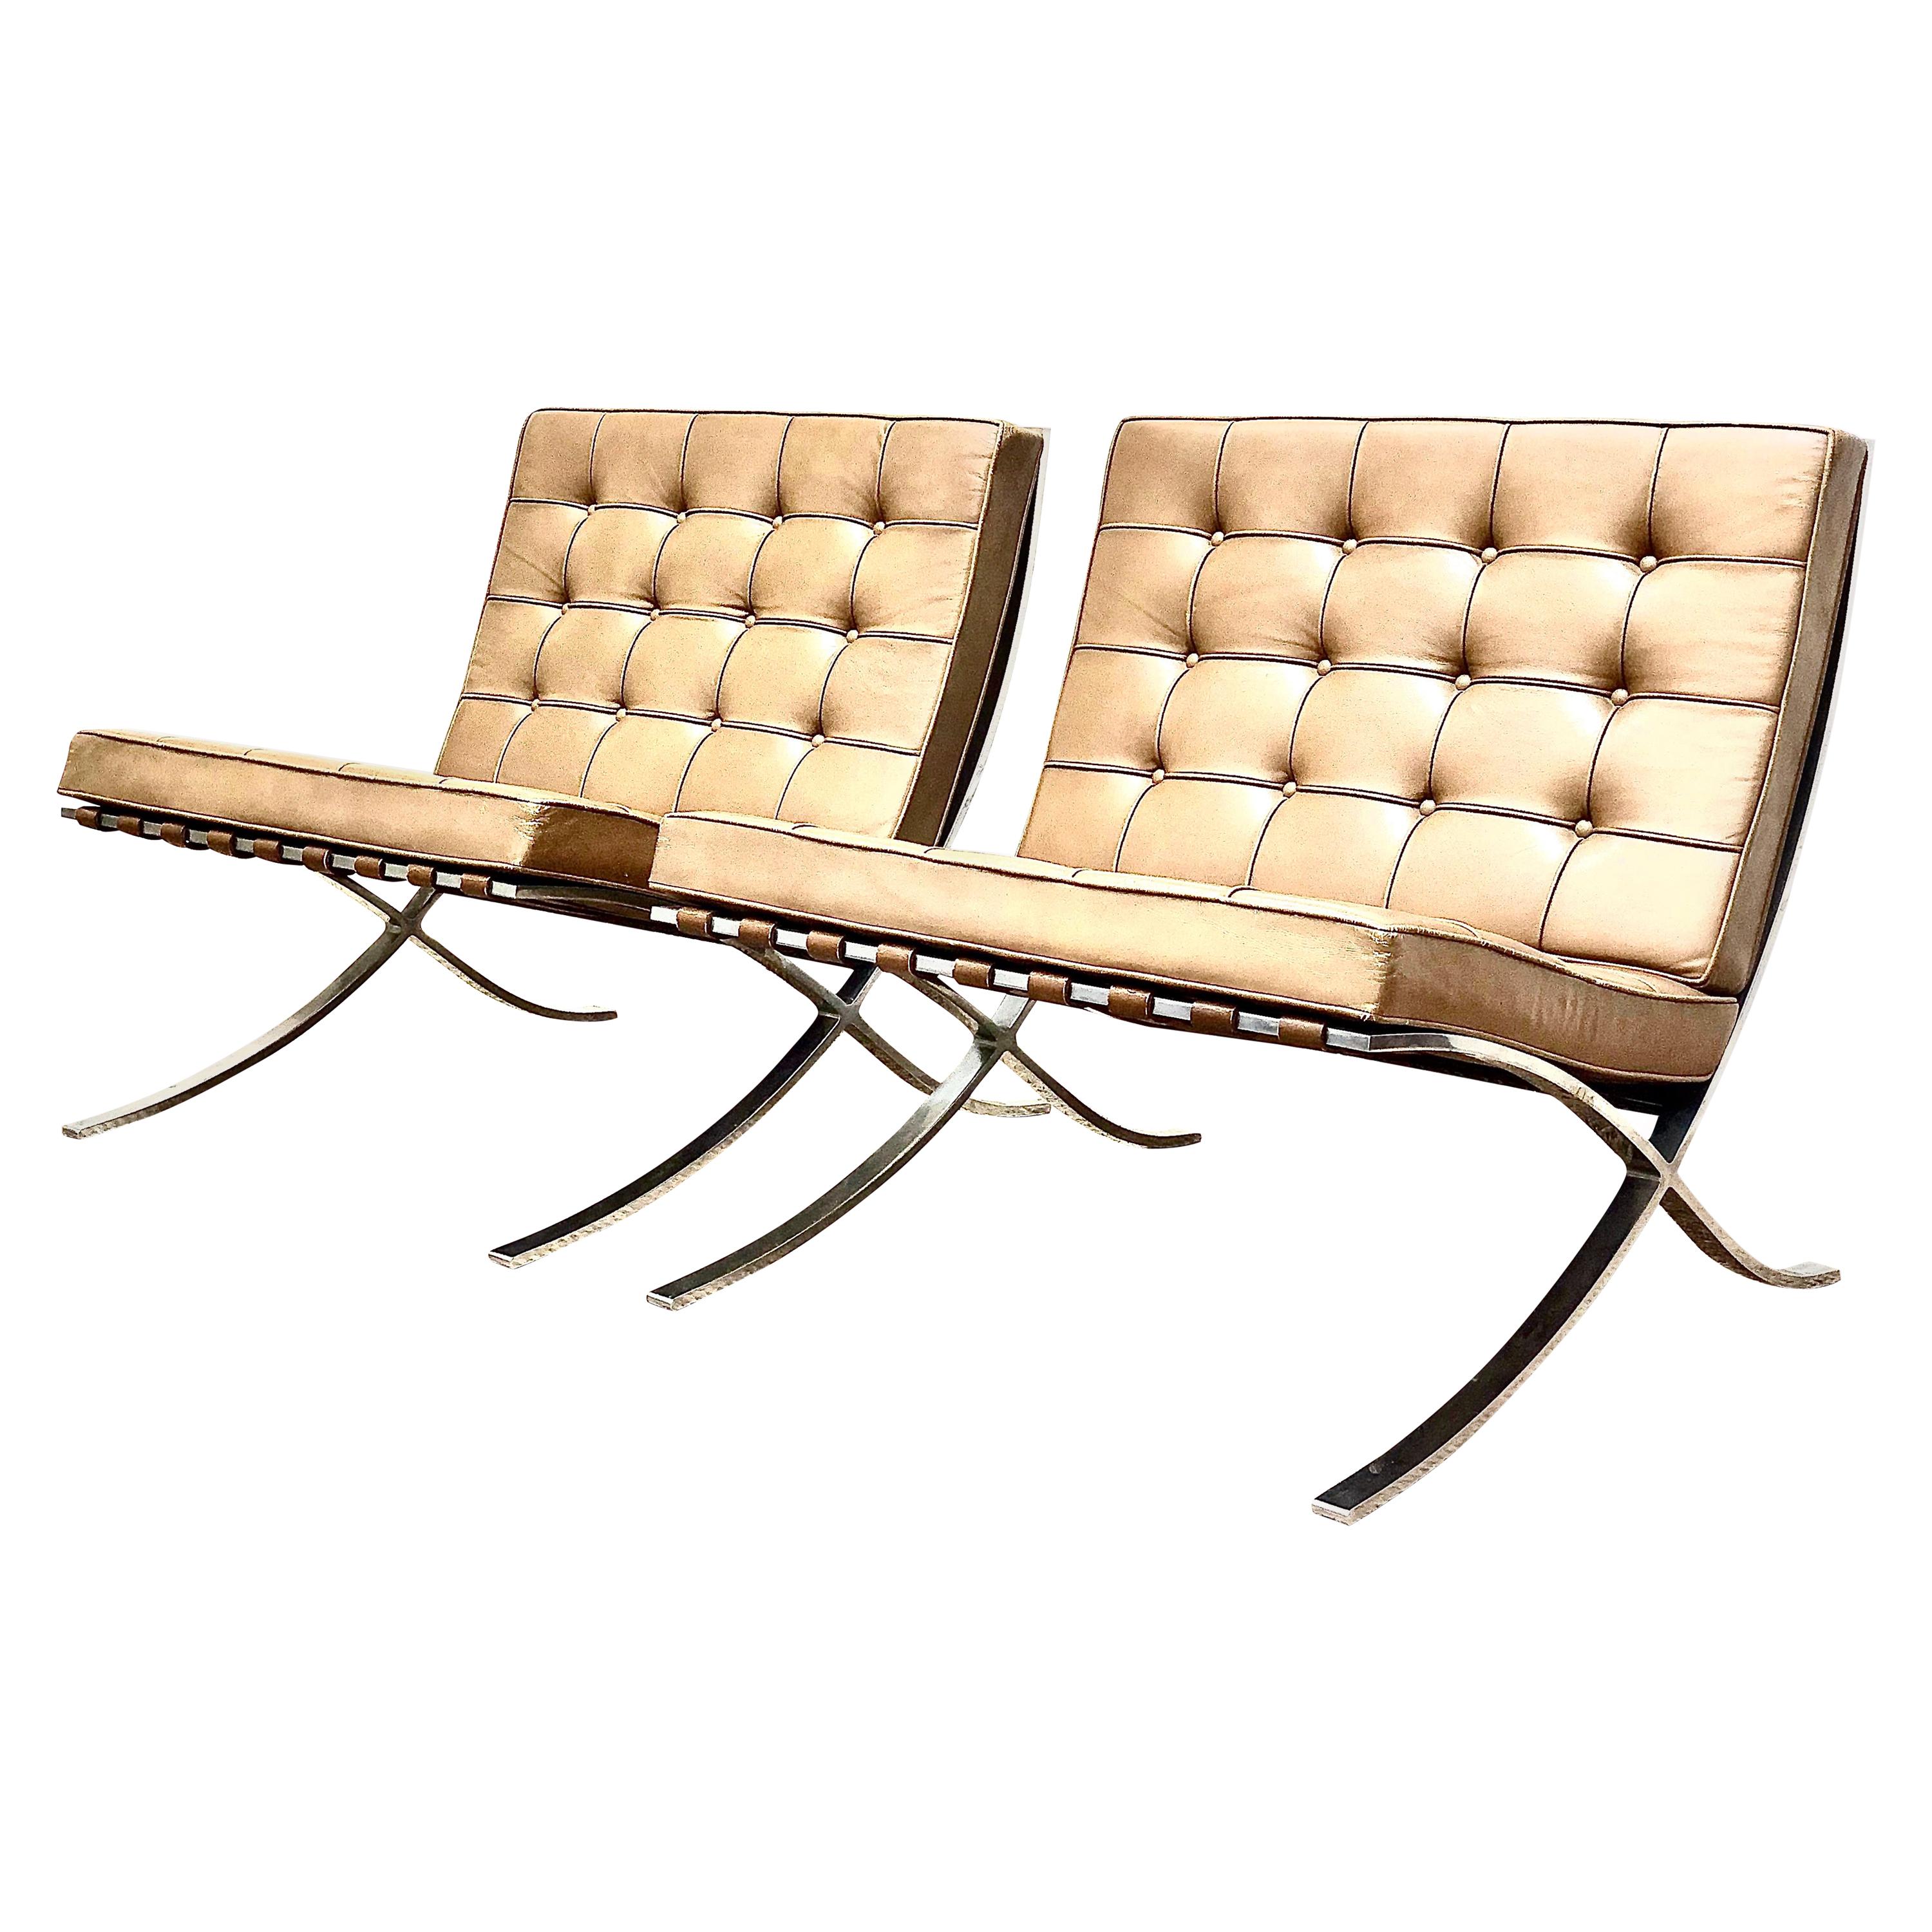 Knoll Barcelona Lounge Chair, Camel, Stainless Steel, Mies van der Rohe, 1980s